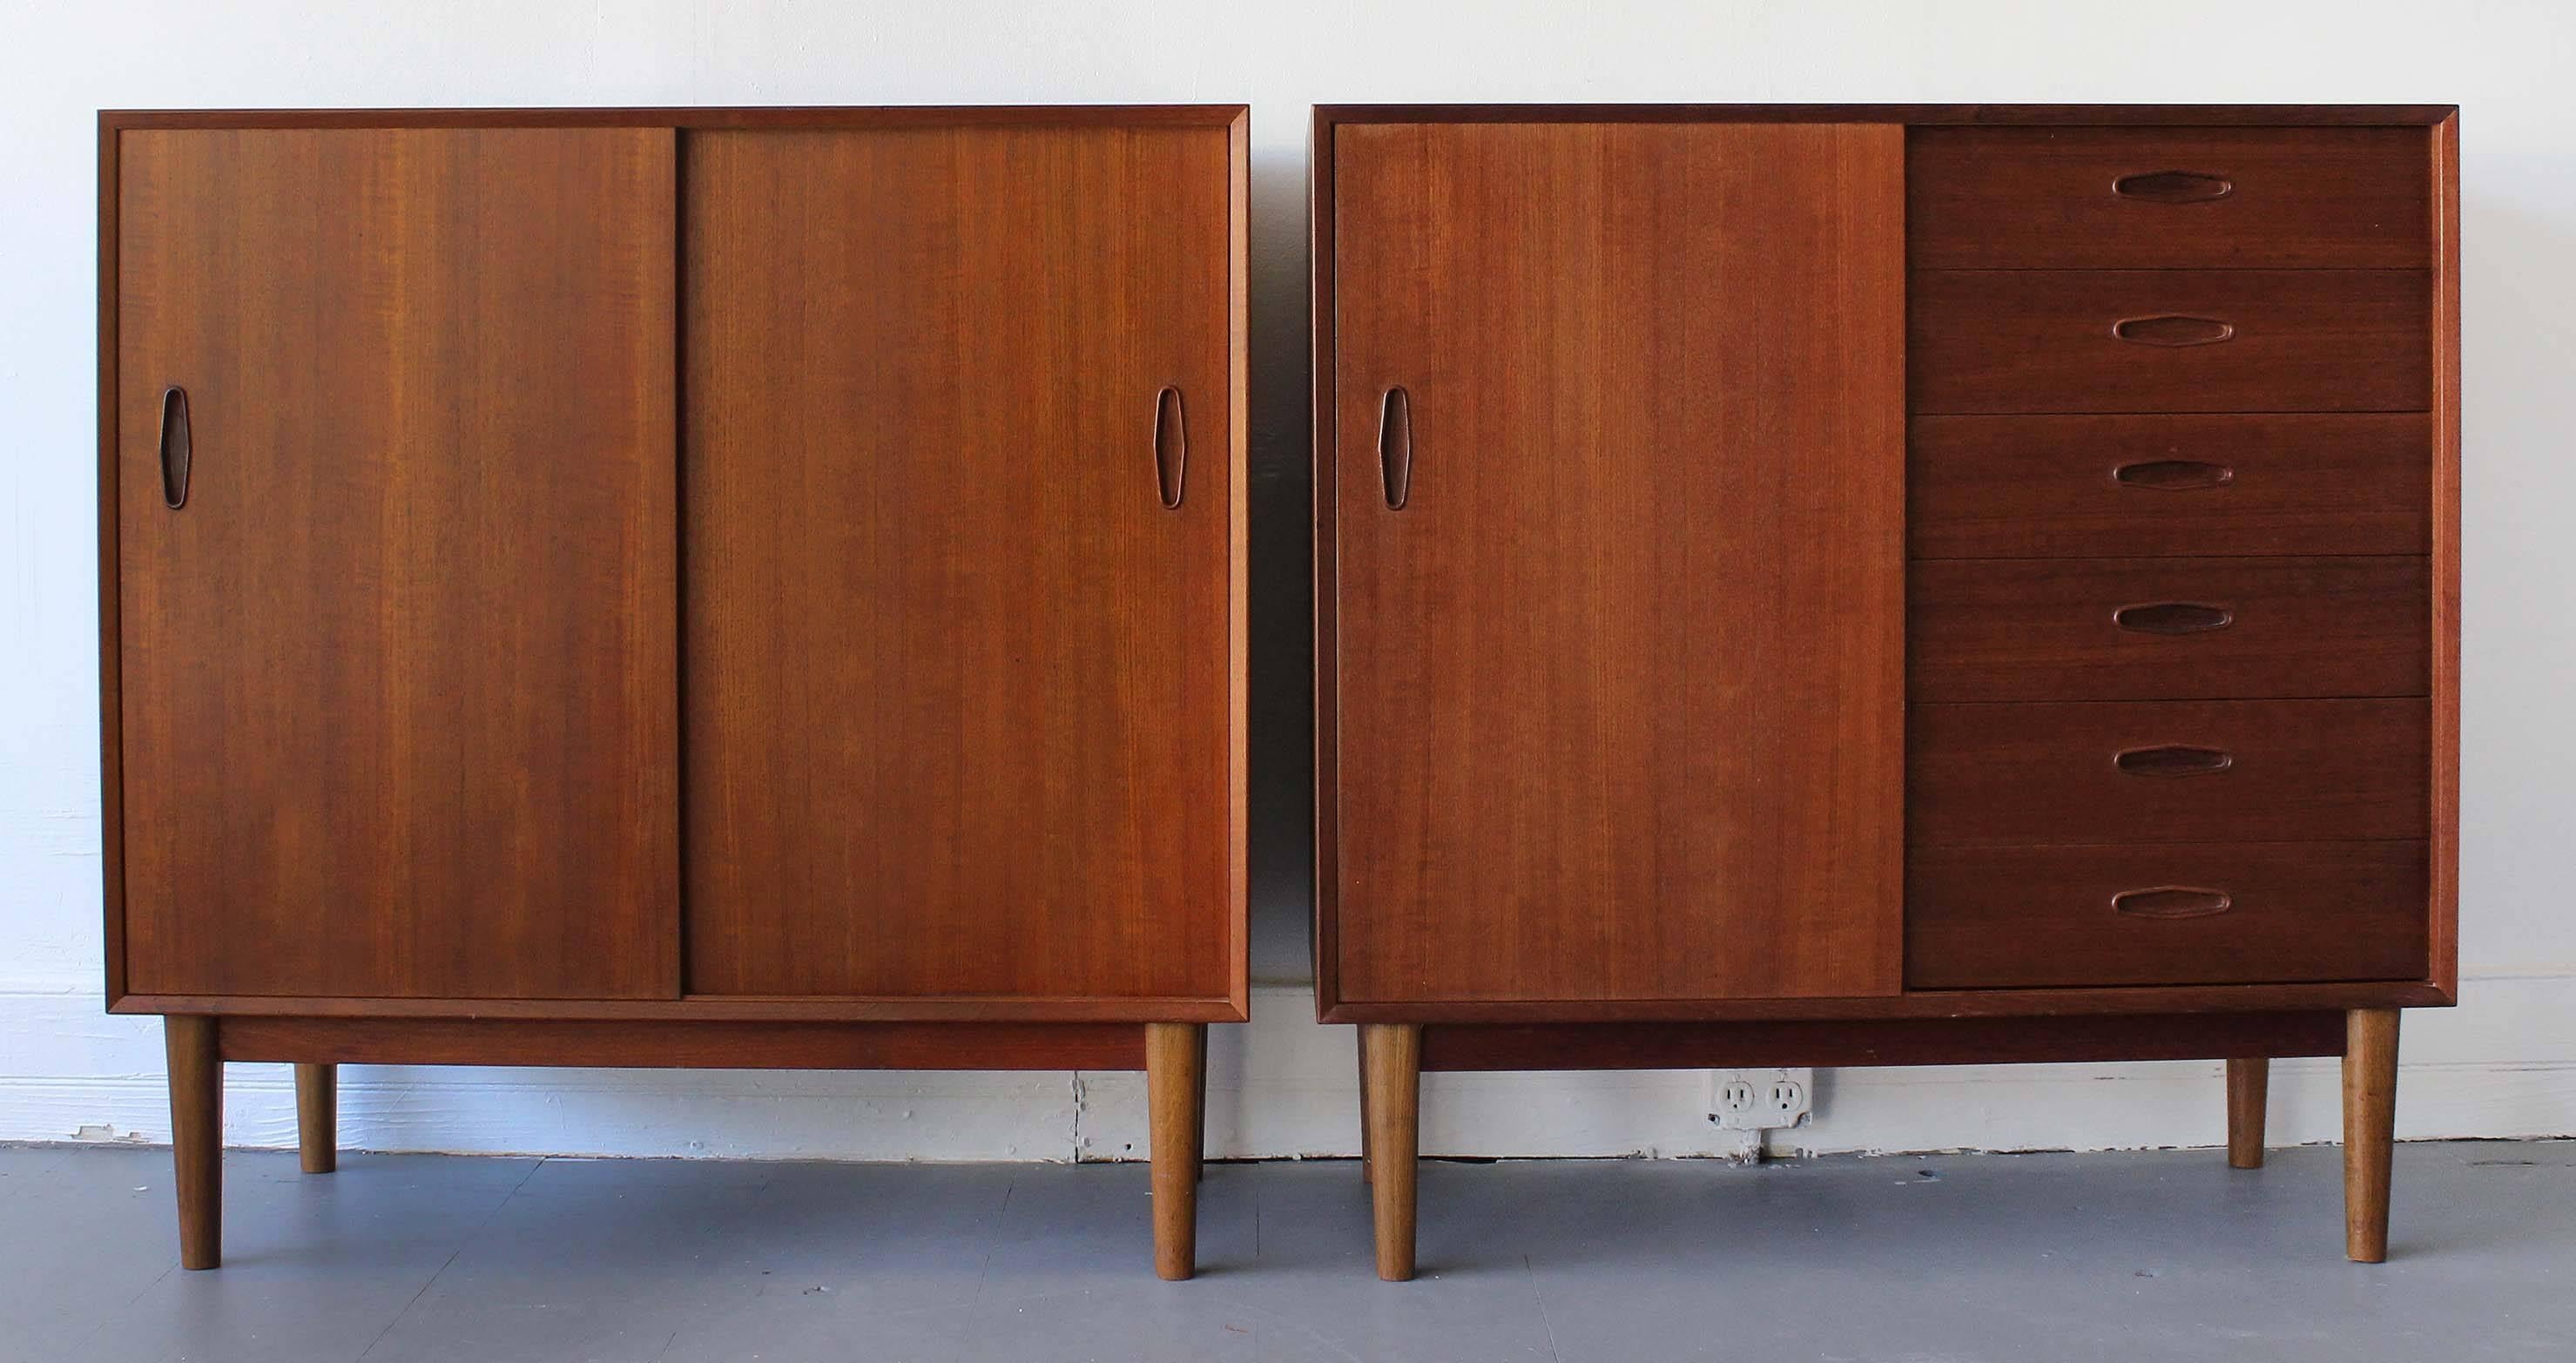 A mixed pair of Mid-Century teak cabinets by Nils Jonsson for Hugo Troed, Sweden.